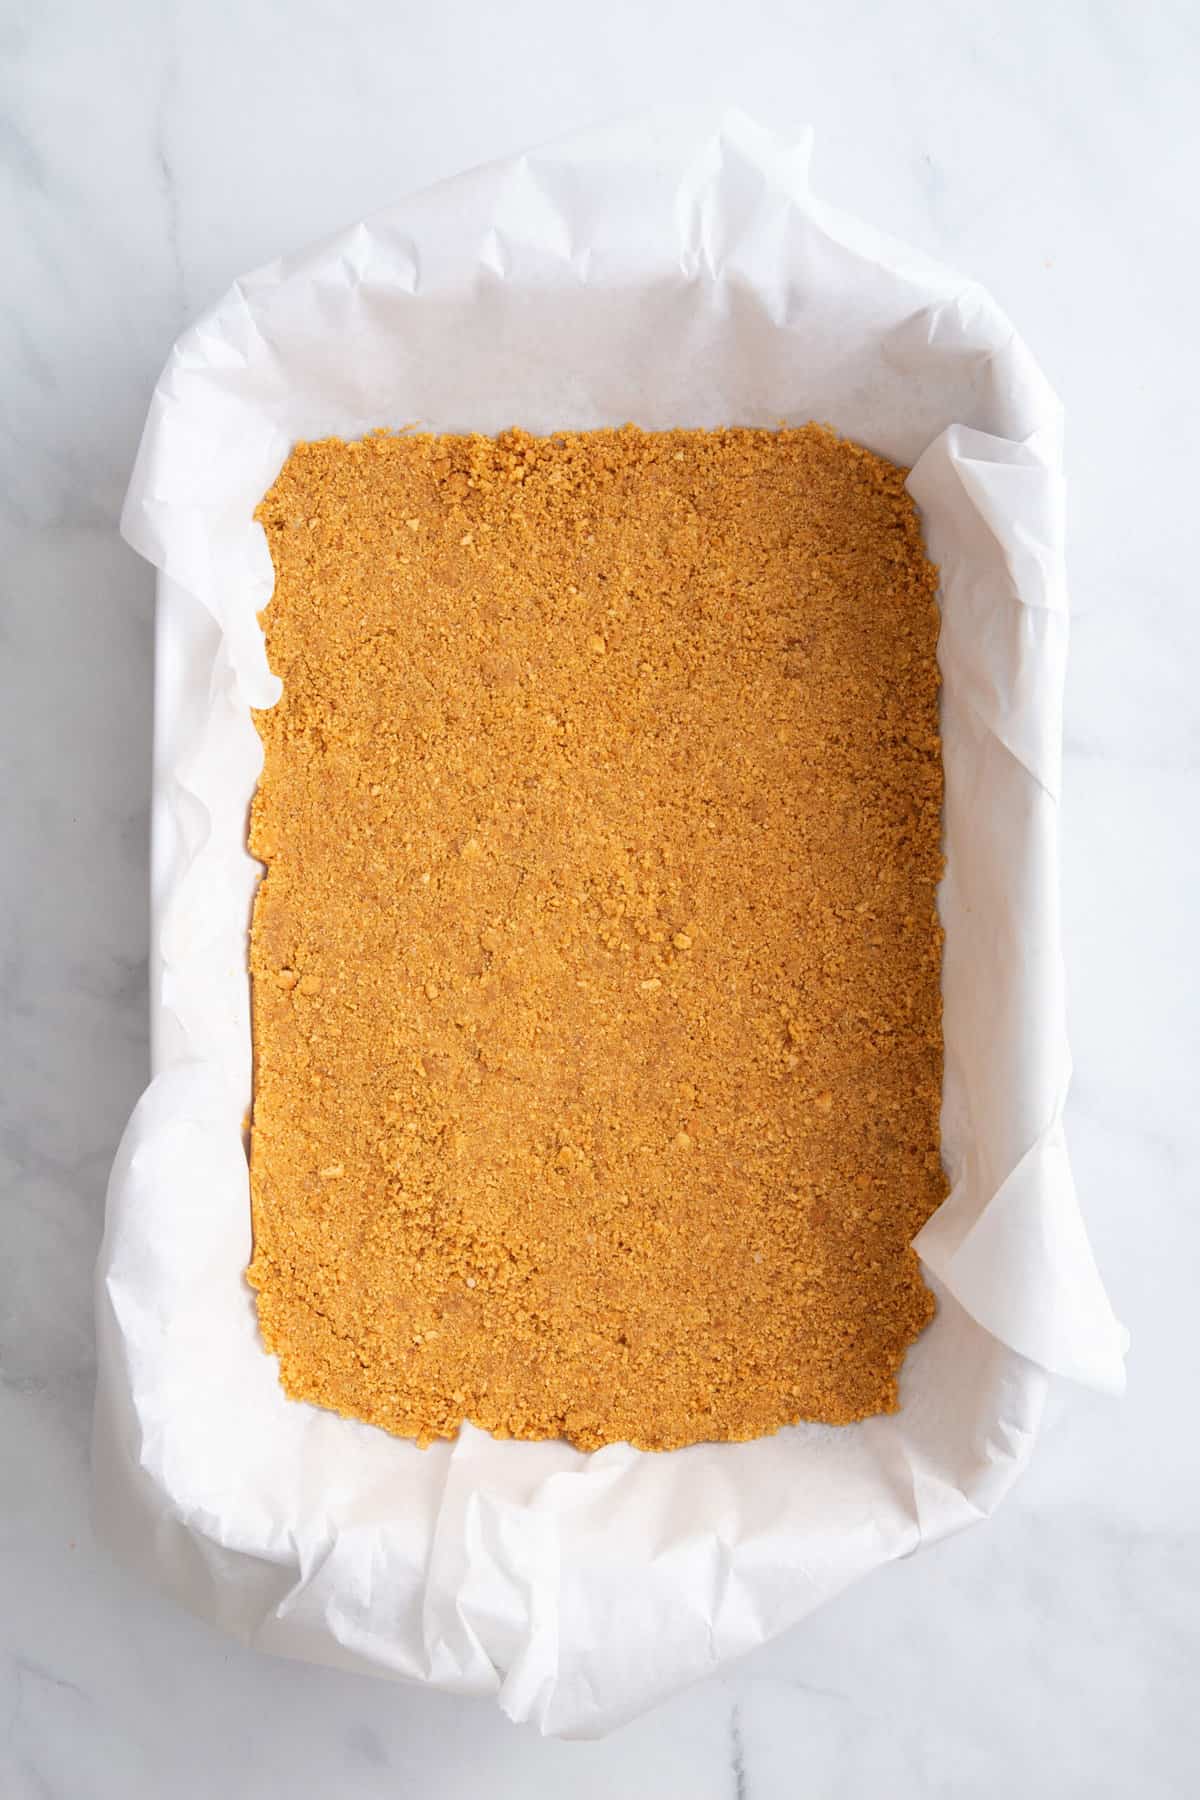 graham cracker crust pressed into a parchment paper lined 9x13 baking dish